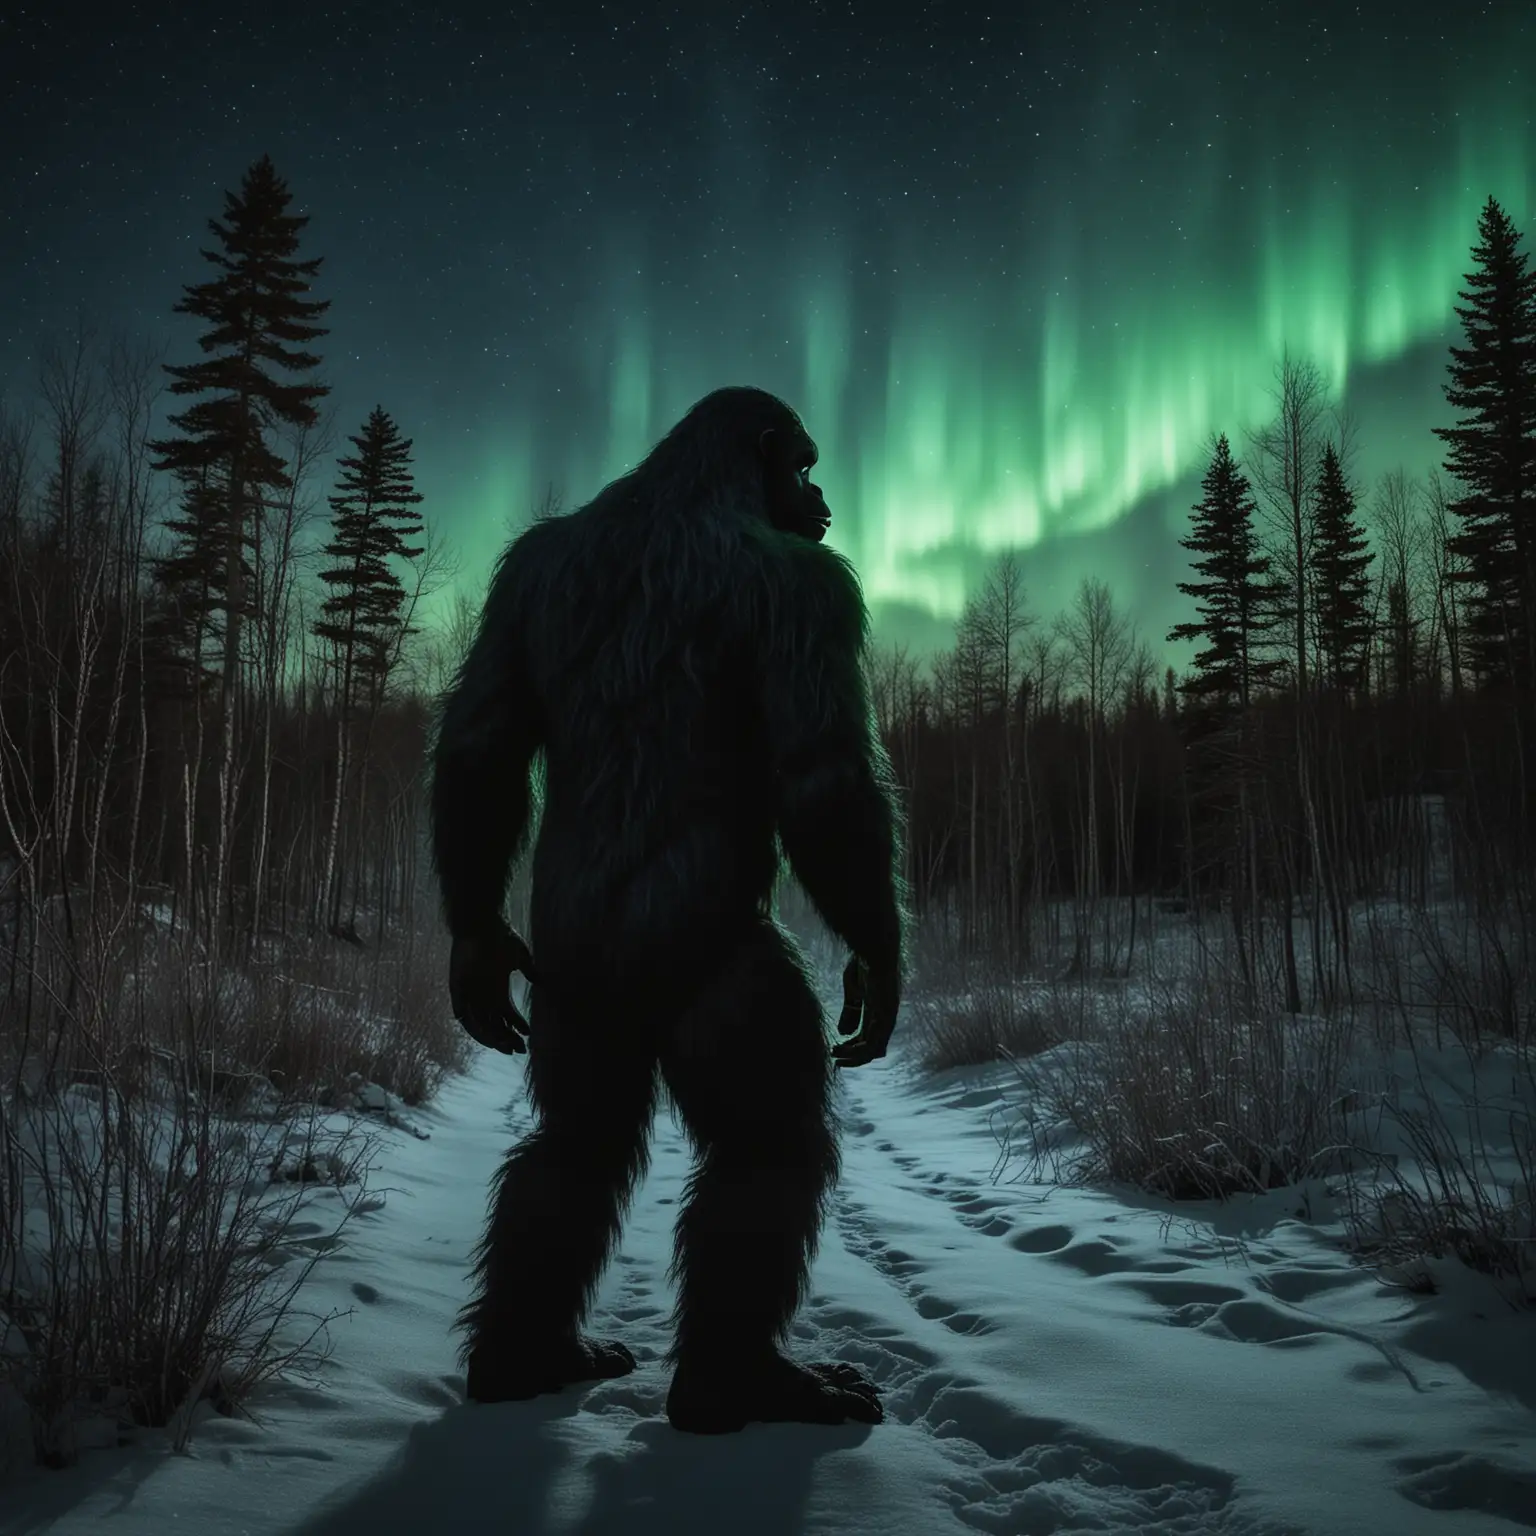 Bigfoot shadowing with the northern lights on the Appalachian mountain's dark night